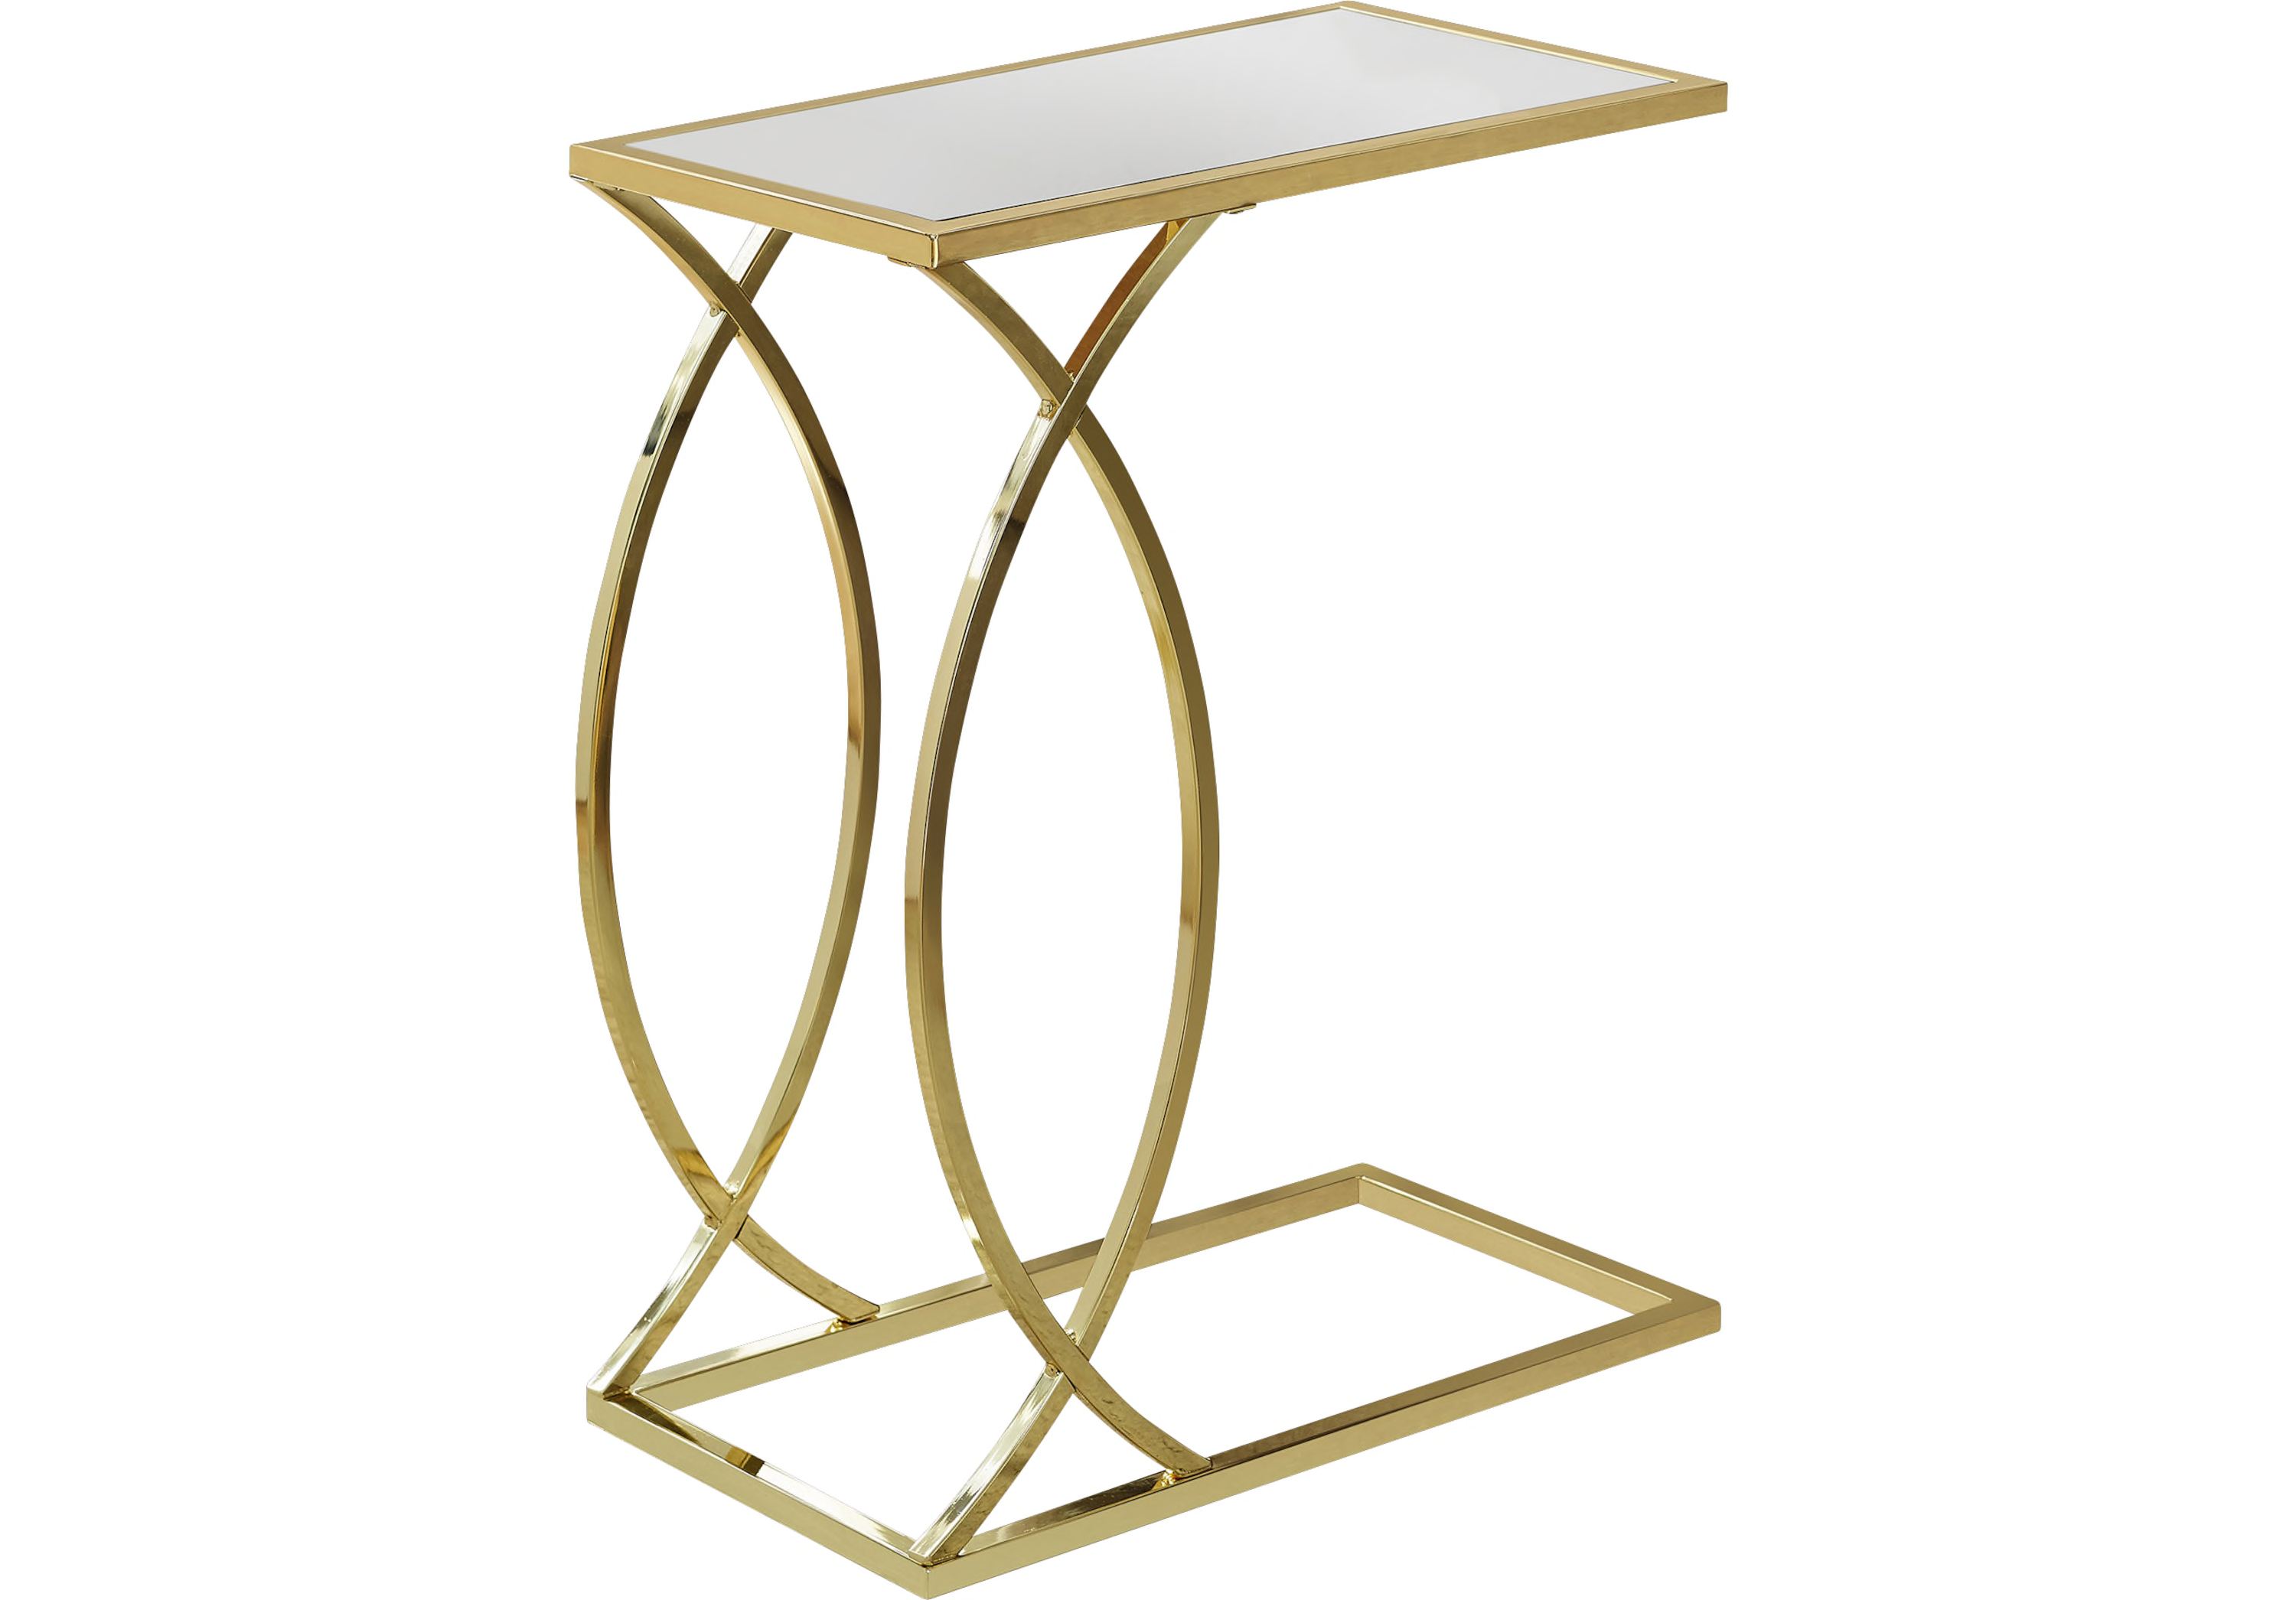 cauley gold accent table tables metal with drawer product dining room chairs real marble top coffee champagne mirrored furniture threshold kitchen console bellevue hairpin legs